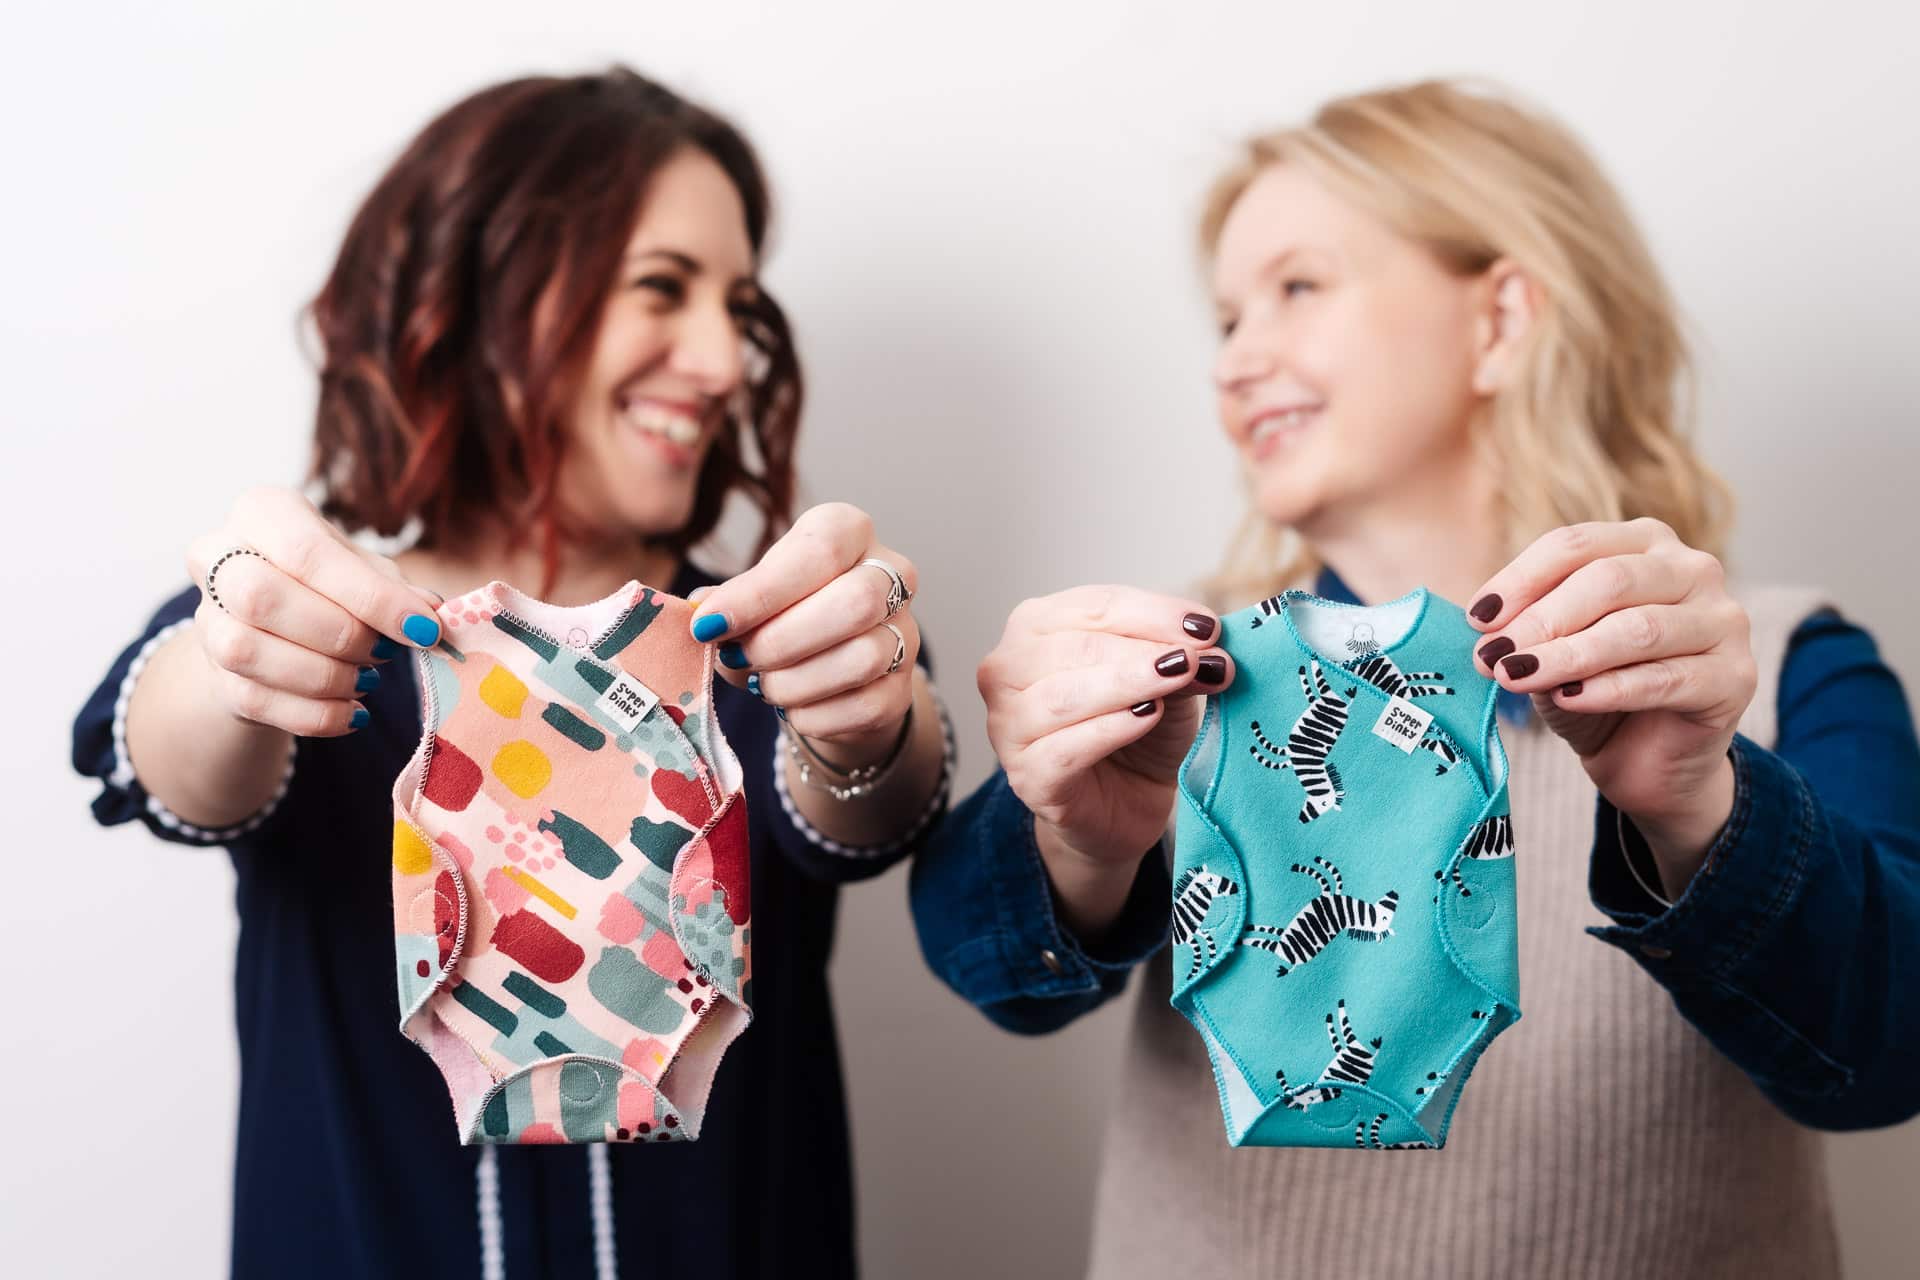 Interview: Lorna Tallowin on premature motherhood & building a preemie clothing business